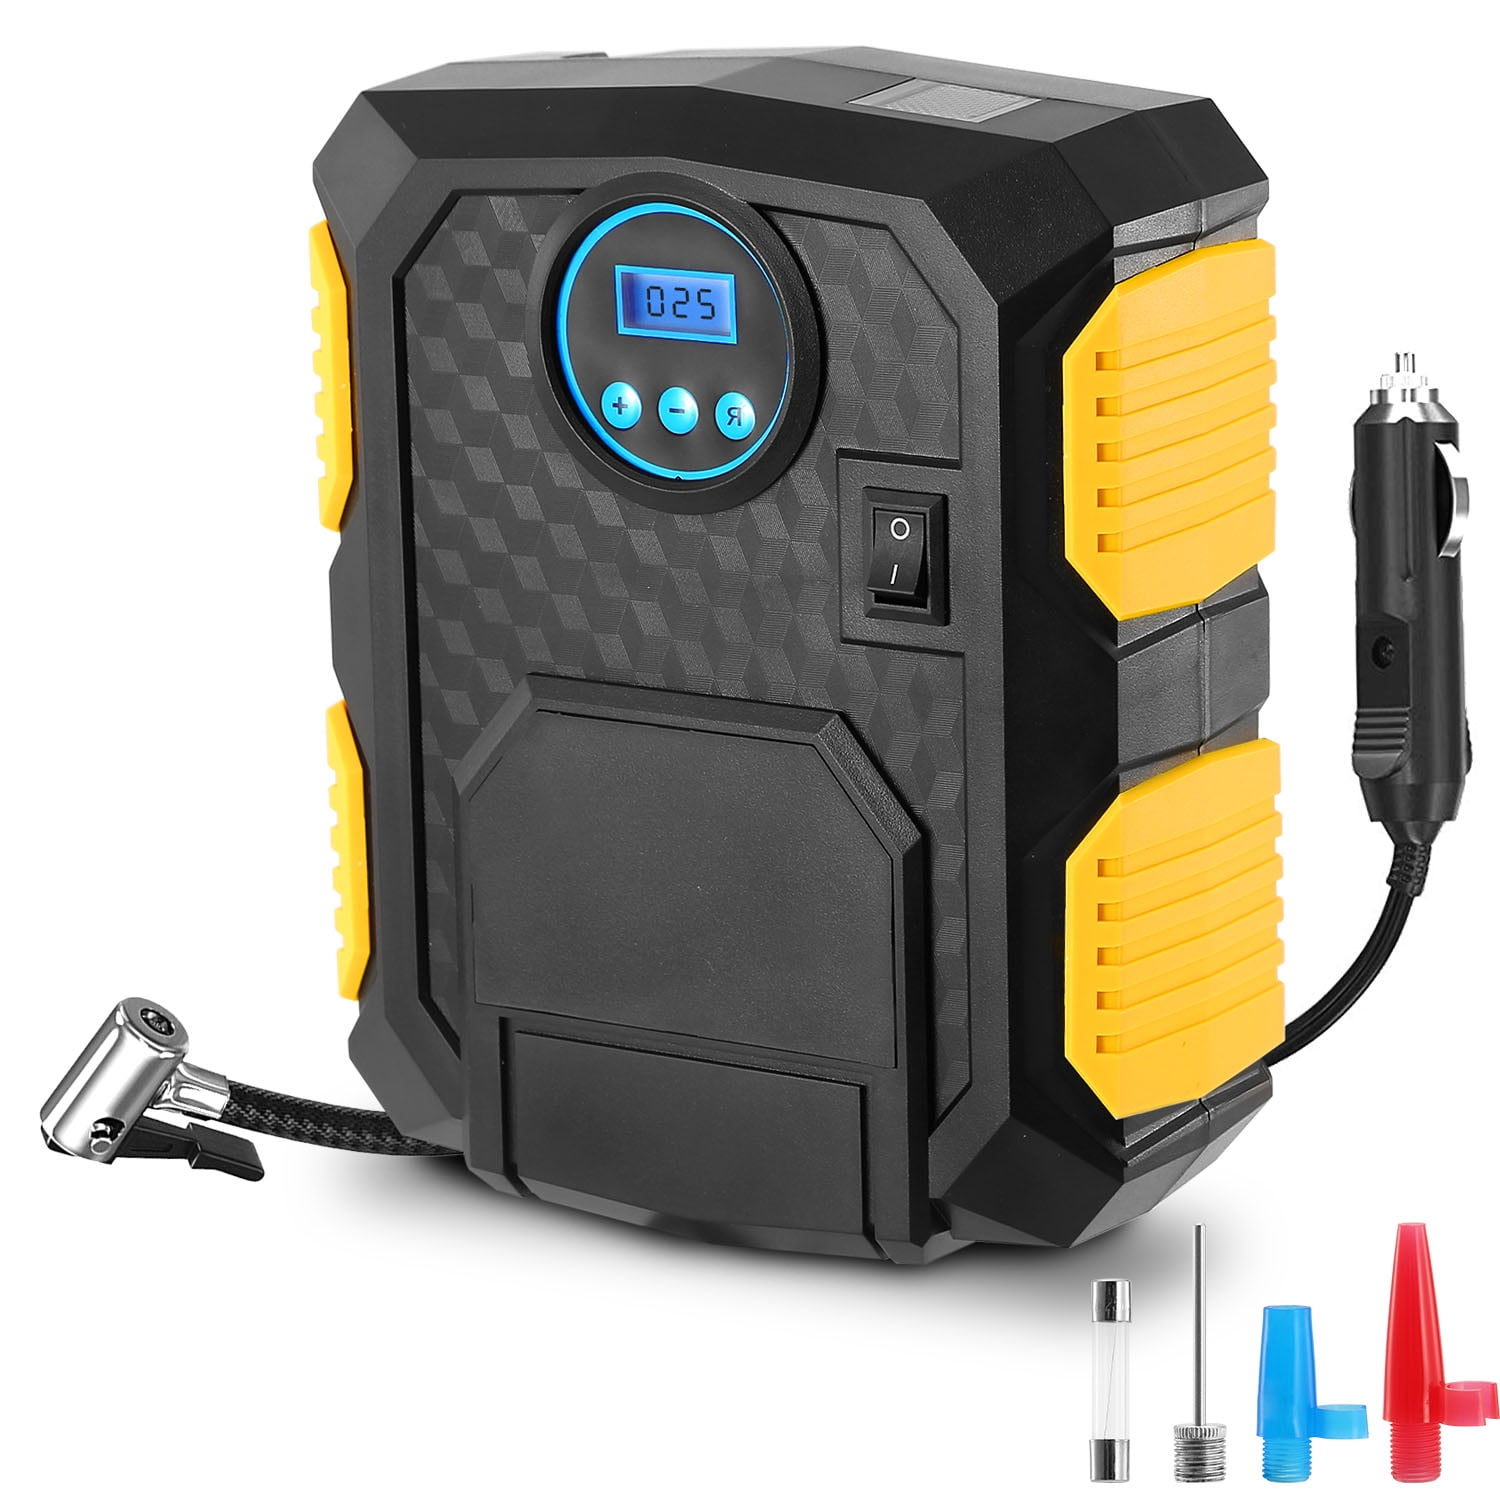  Hafuloky Tire Inflator Portable Air Compressor